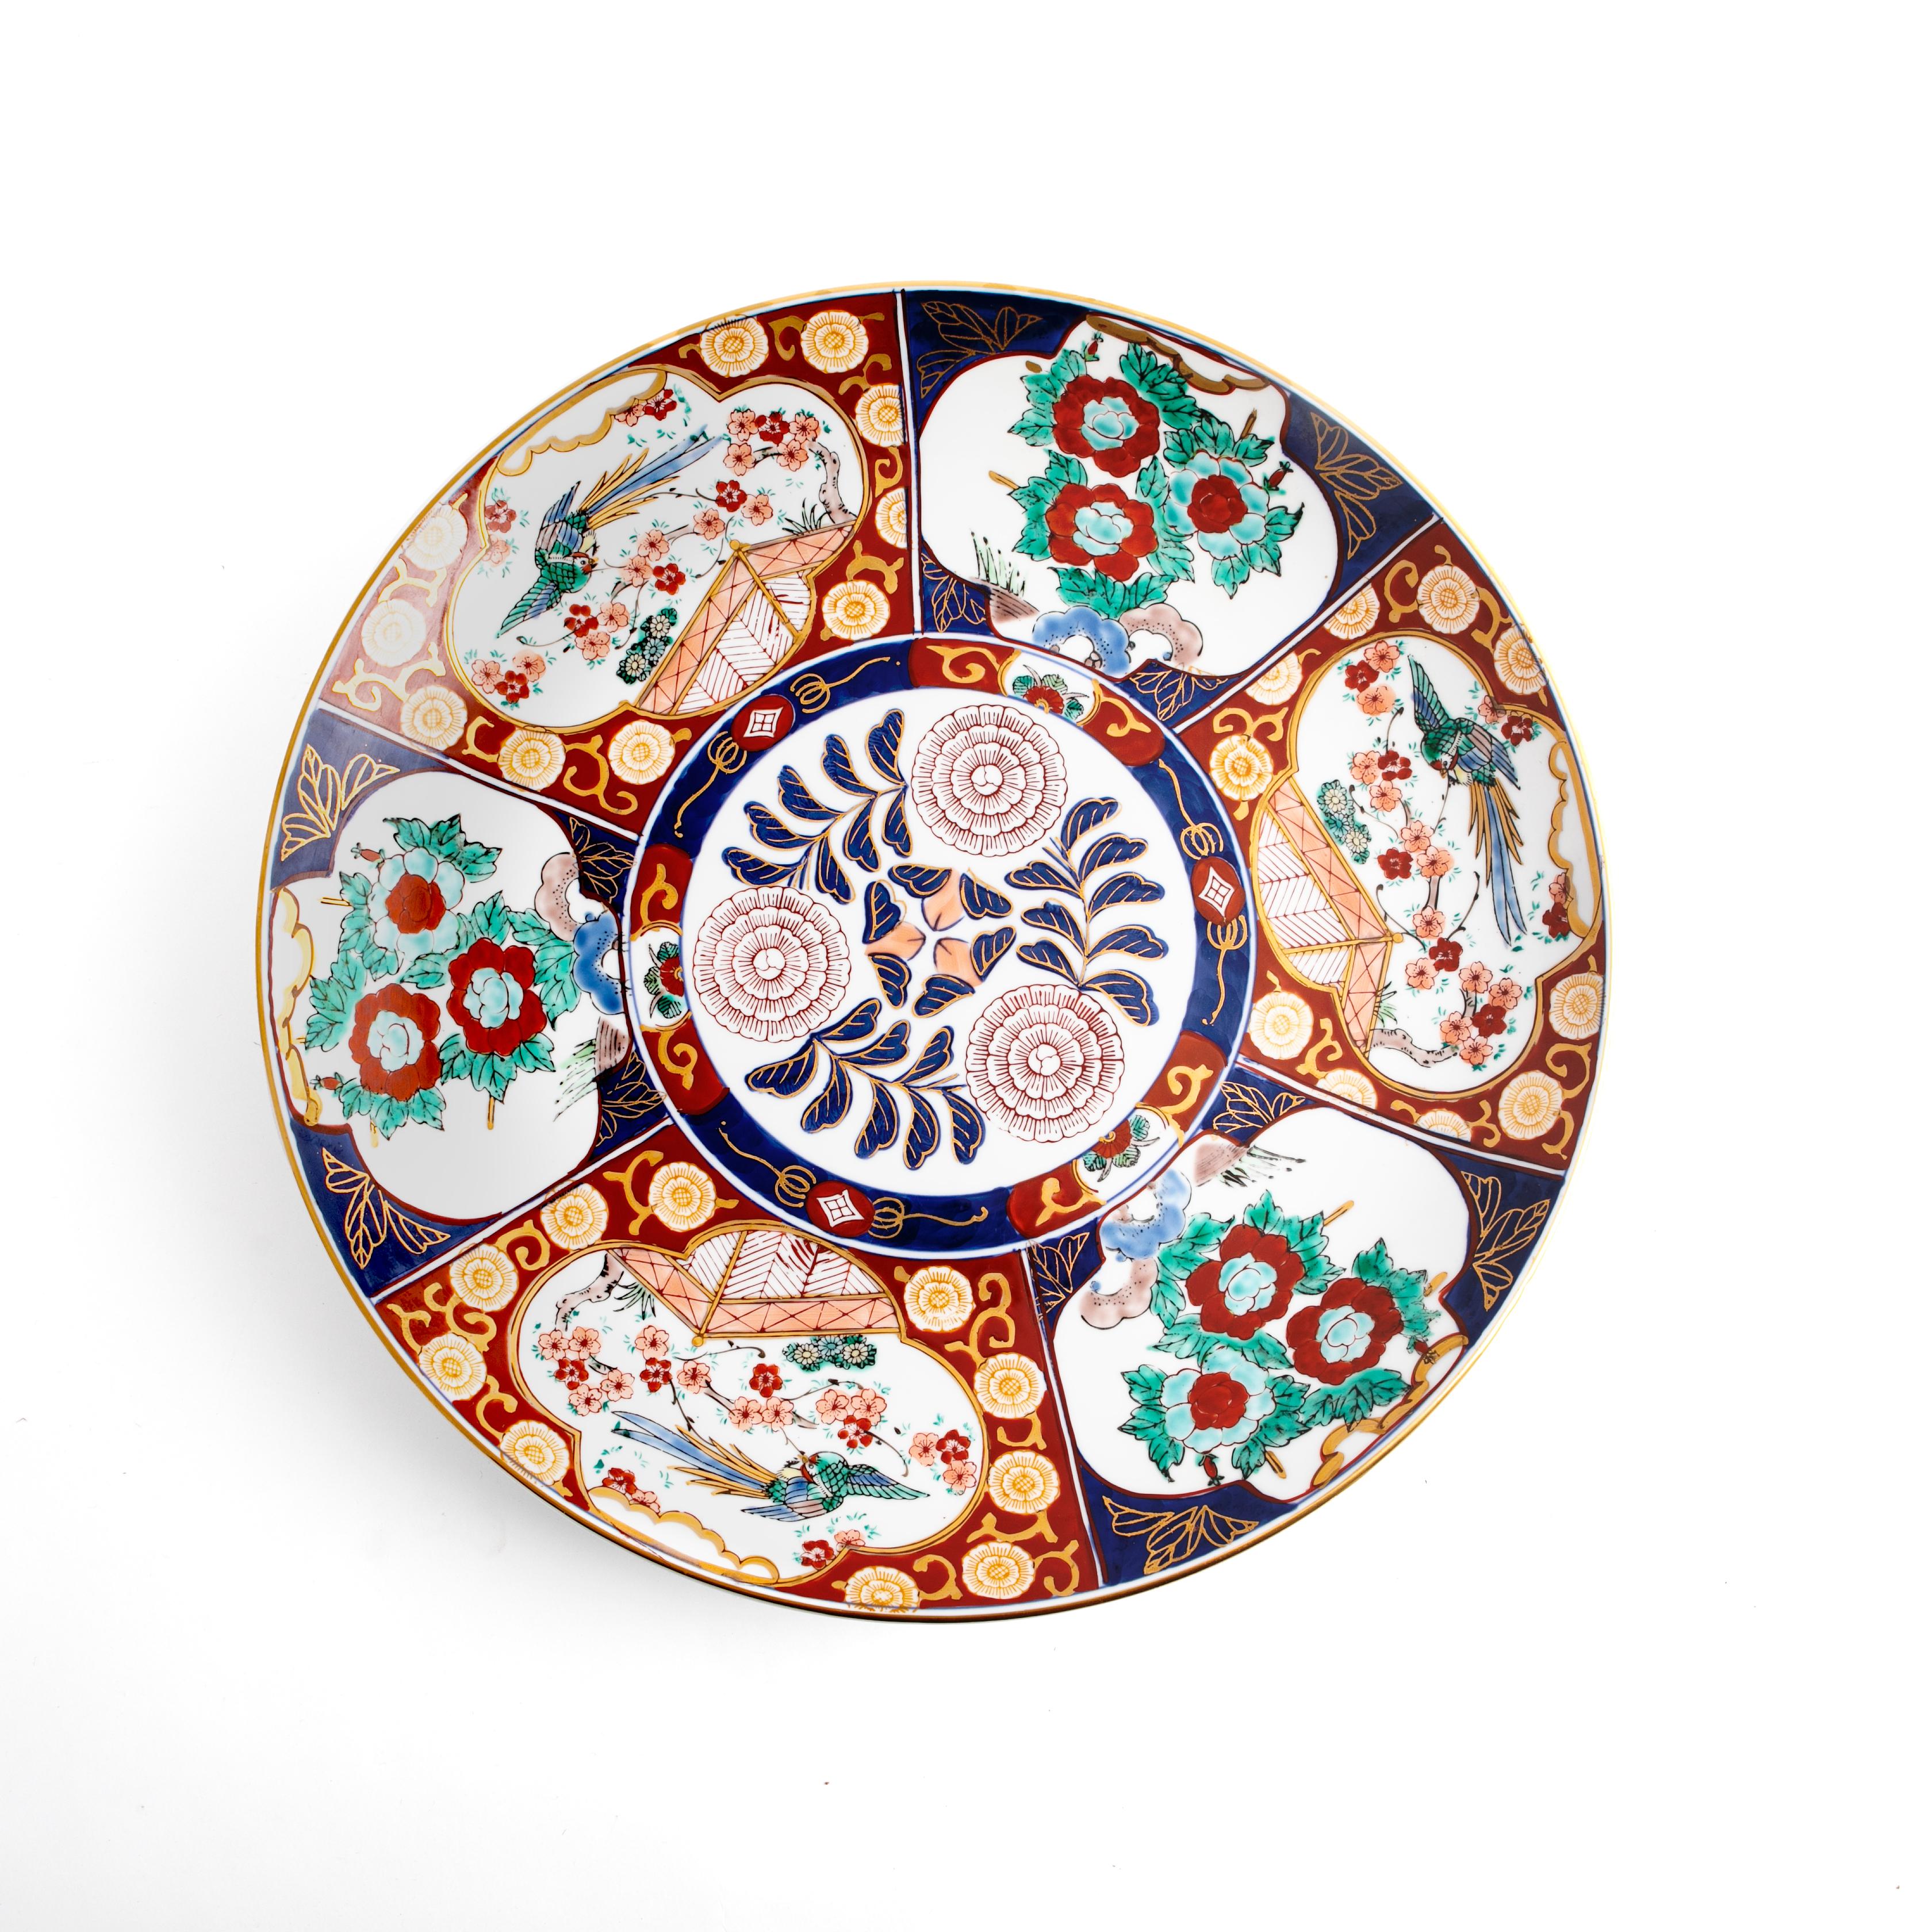 A large Japanese porcelain imari charger dating from the Meiji era.
Hand painted design in polychrome colors, six alternating panels surrounding the central floral medallion. Reverse with blue decorations. Marked.
In excellent condition.
Japan,